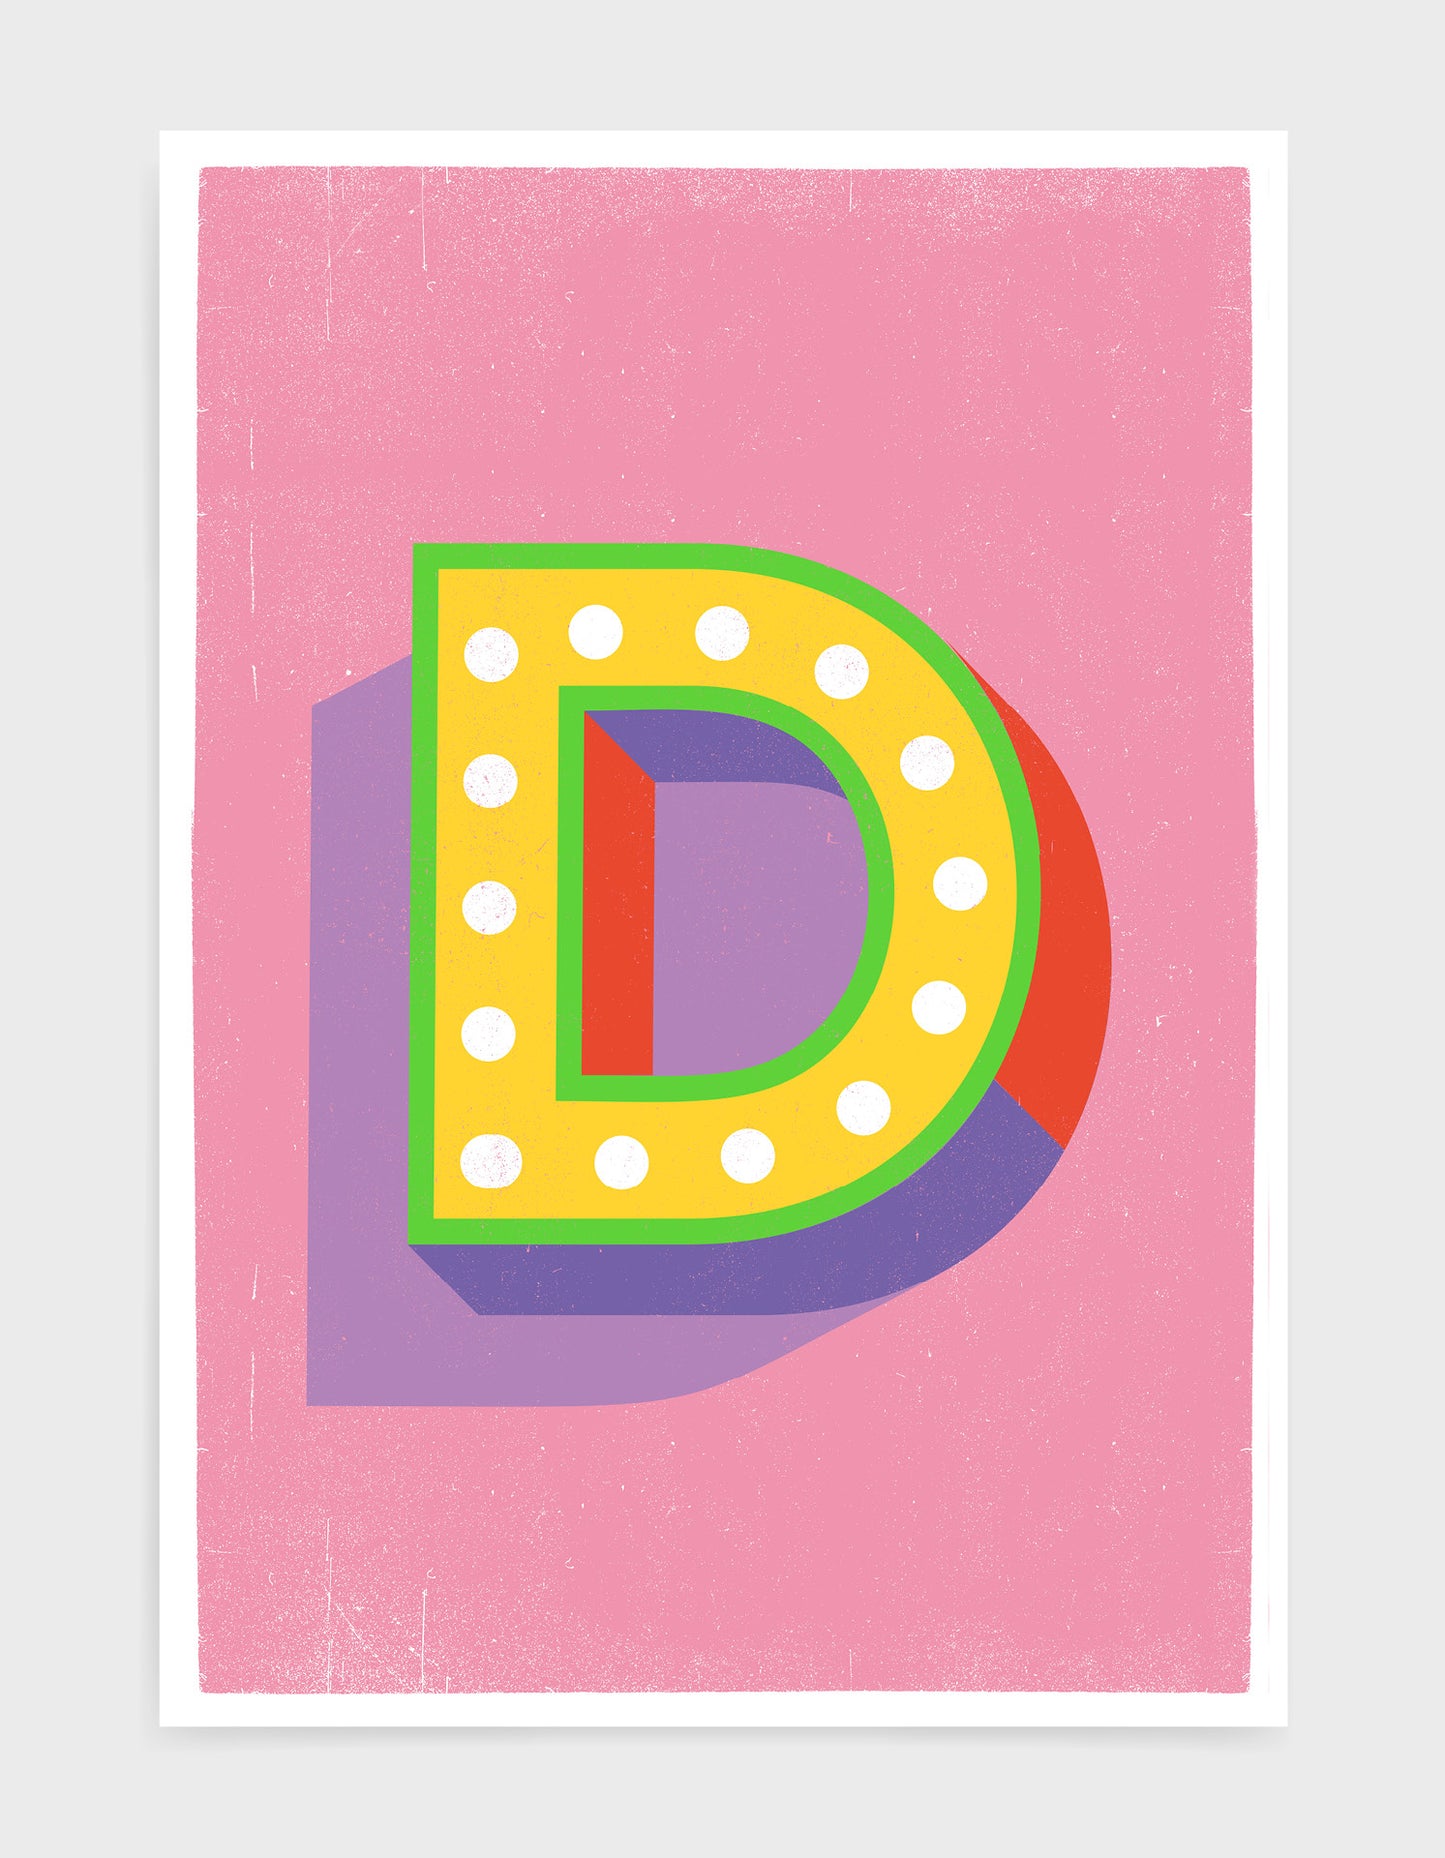 Alphabet print - lights on font in yellow against a pink background - letter d